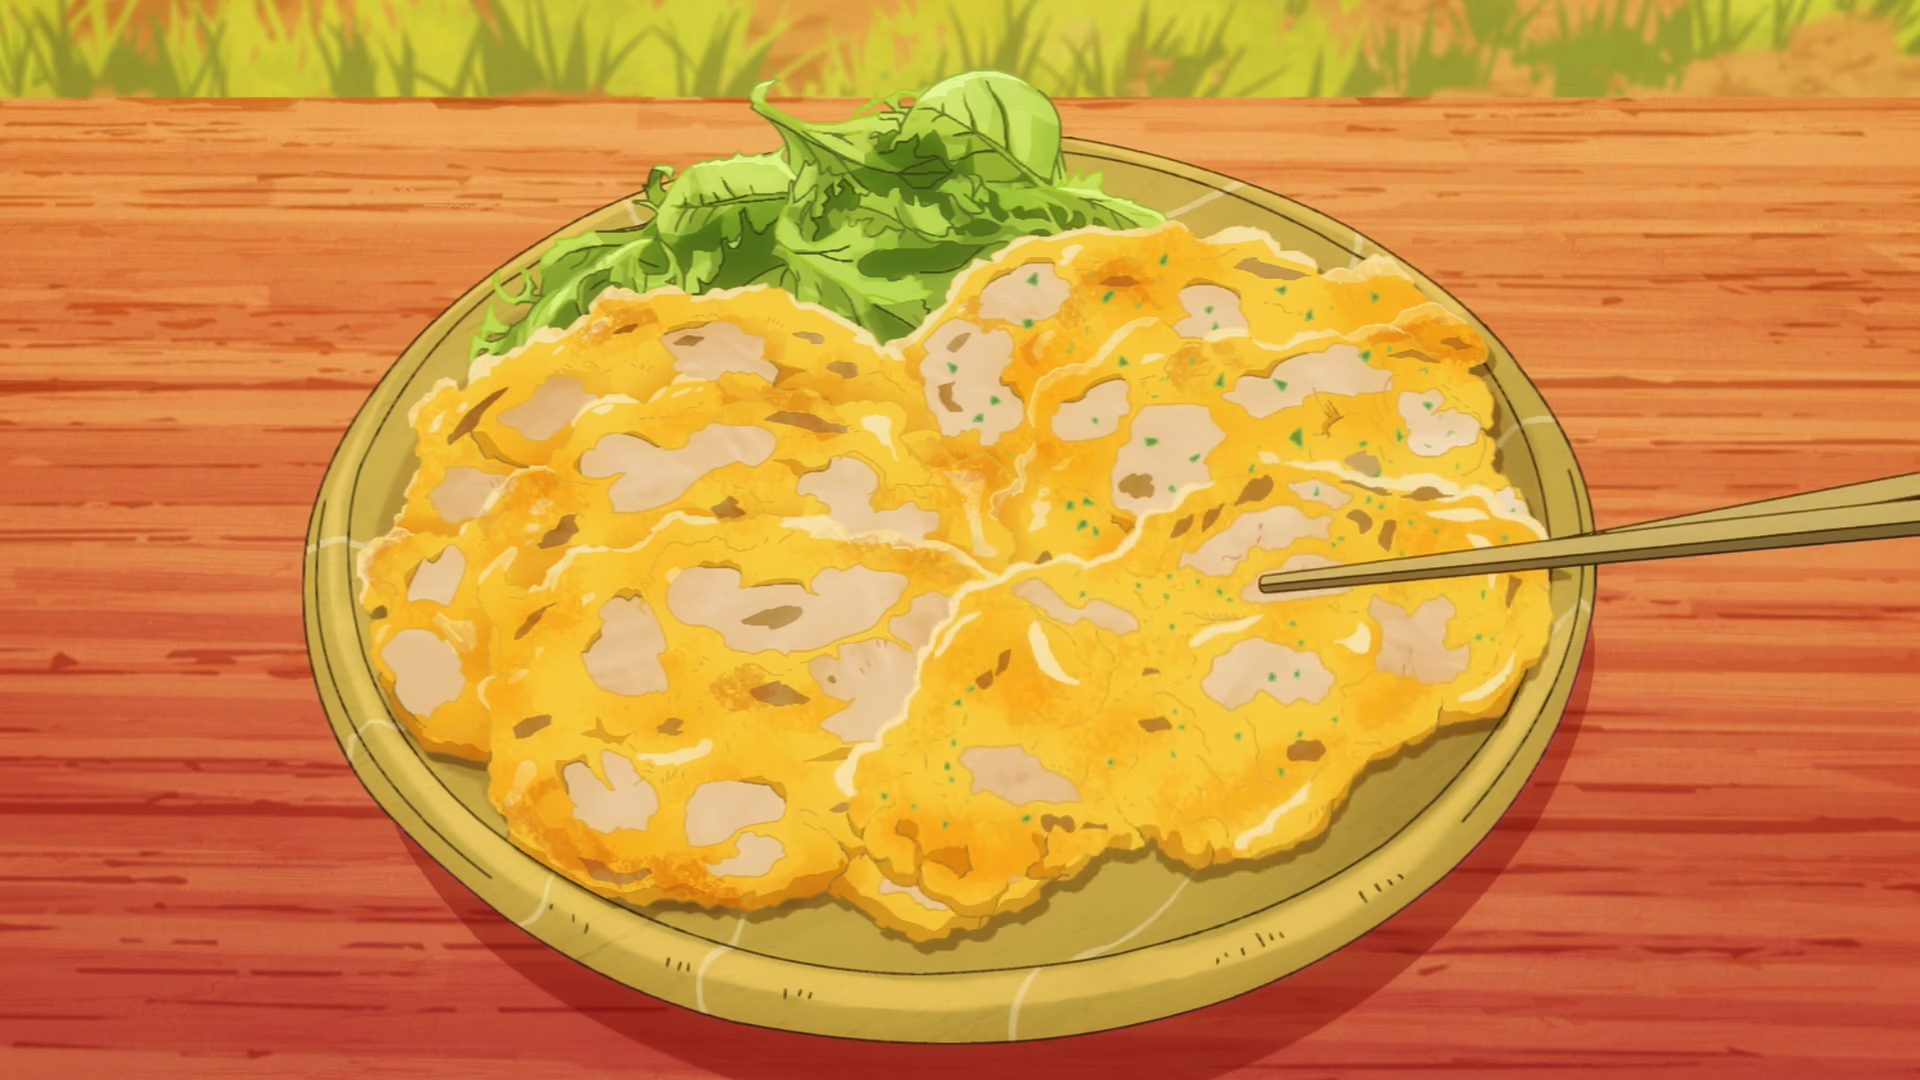 Tondemo Skill de Isekai Hourou Meshi • Campfire Cooking in Another World  with My Absurd Skill - Episode 9 discussion : r/anime